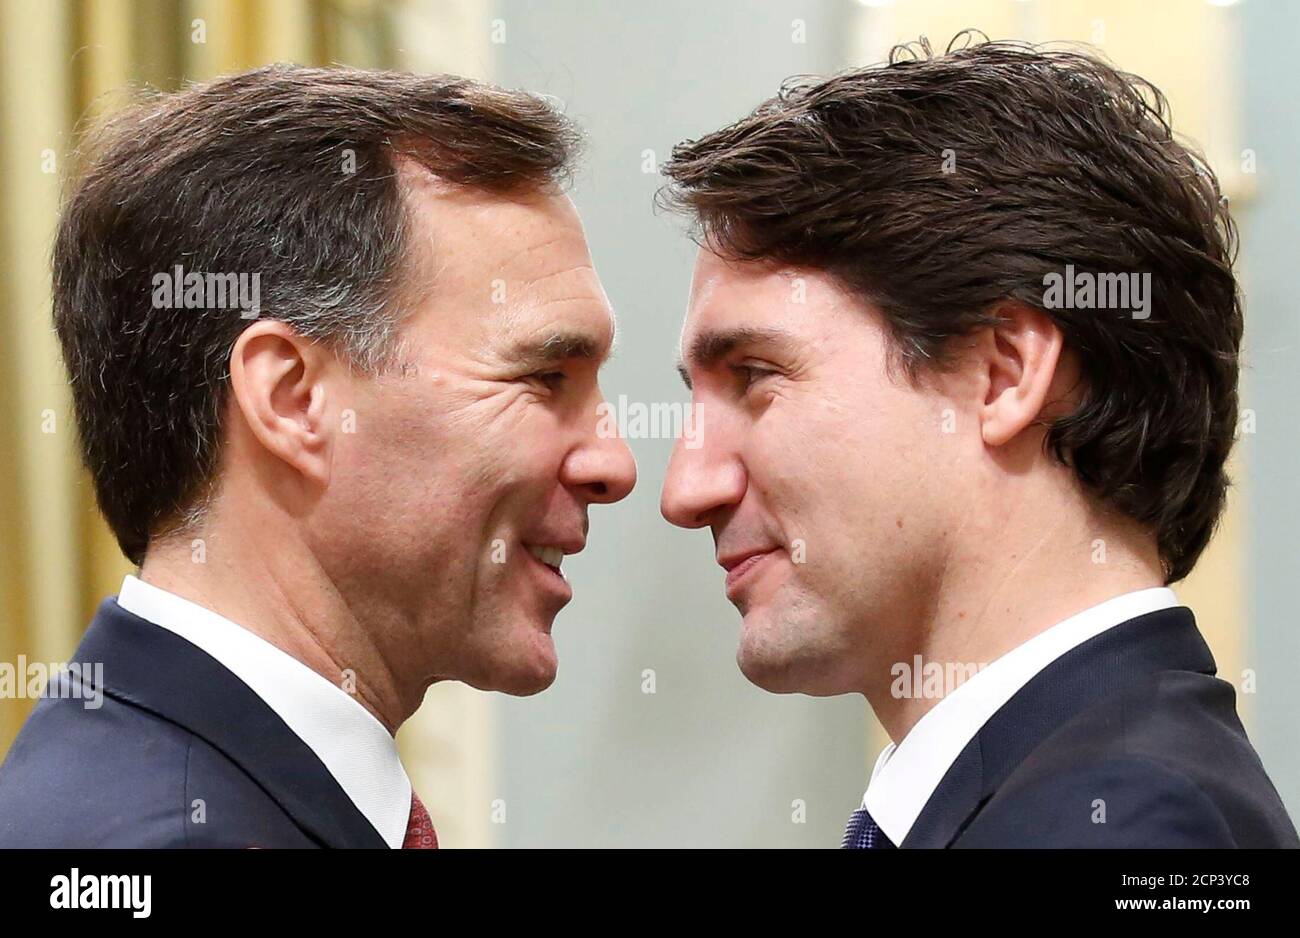 Canada's new Finance Minister Bill Morneau (L) is congratulated by Prime Minister Justin Trudeau at Rideau Hall in Ottawa November 4, 2015. Morneau's expertise on pension reform will likely also be a significant asset to the newly sworn in Liberal Prime Minister Justin Trudeau, who promised during the election campaign to work with the provinces and businesses to enhance the national pension plan.   REUTERS/Chris Wattie TPX IMAGES OF THE DAY Stock Photo